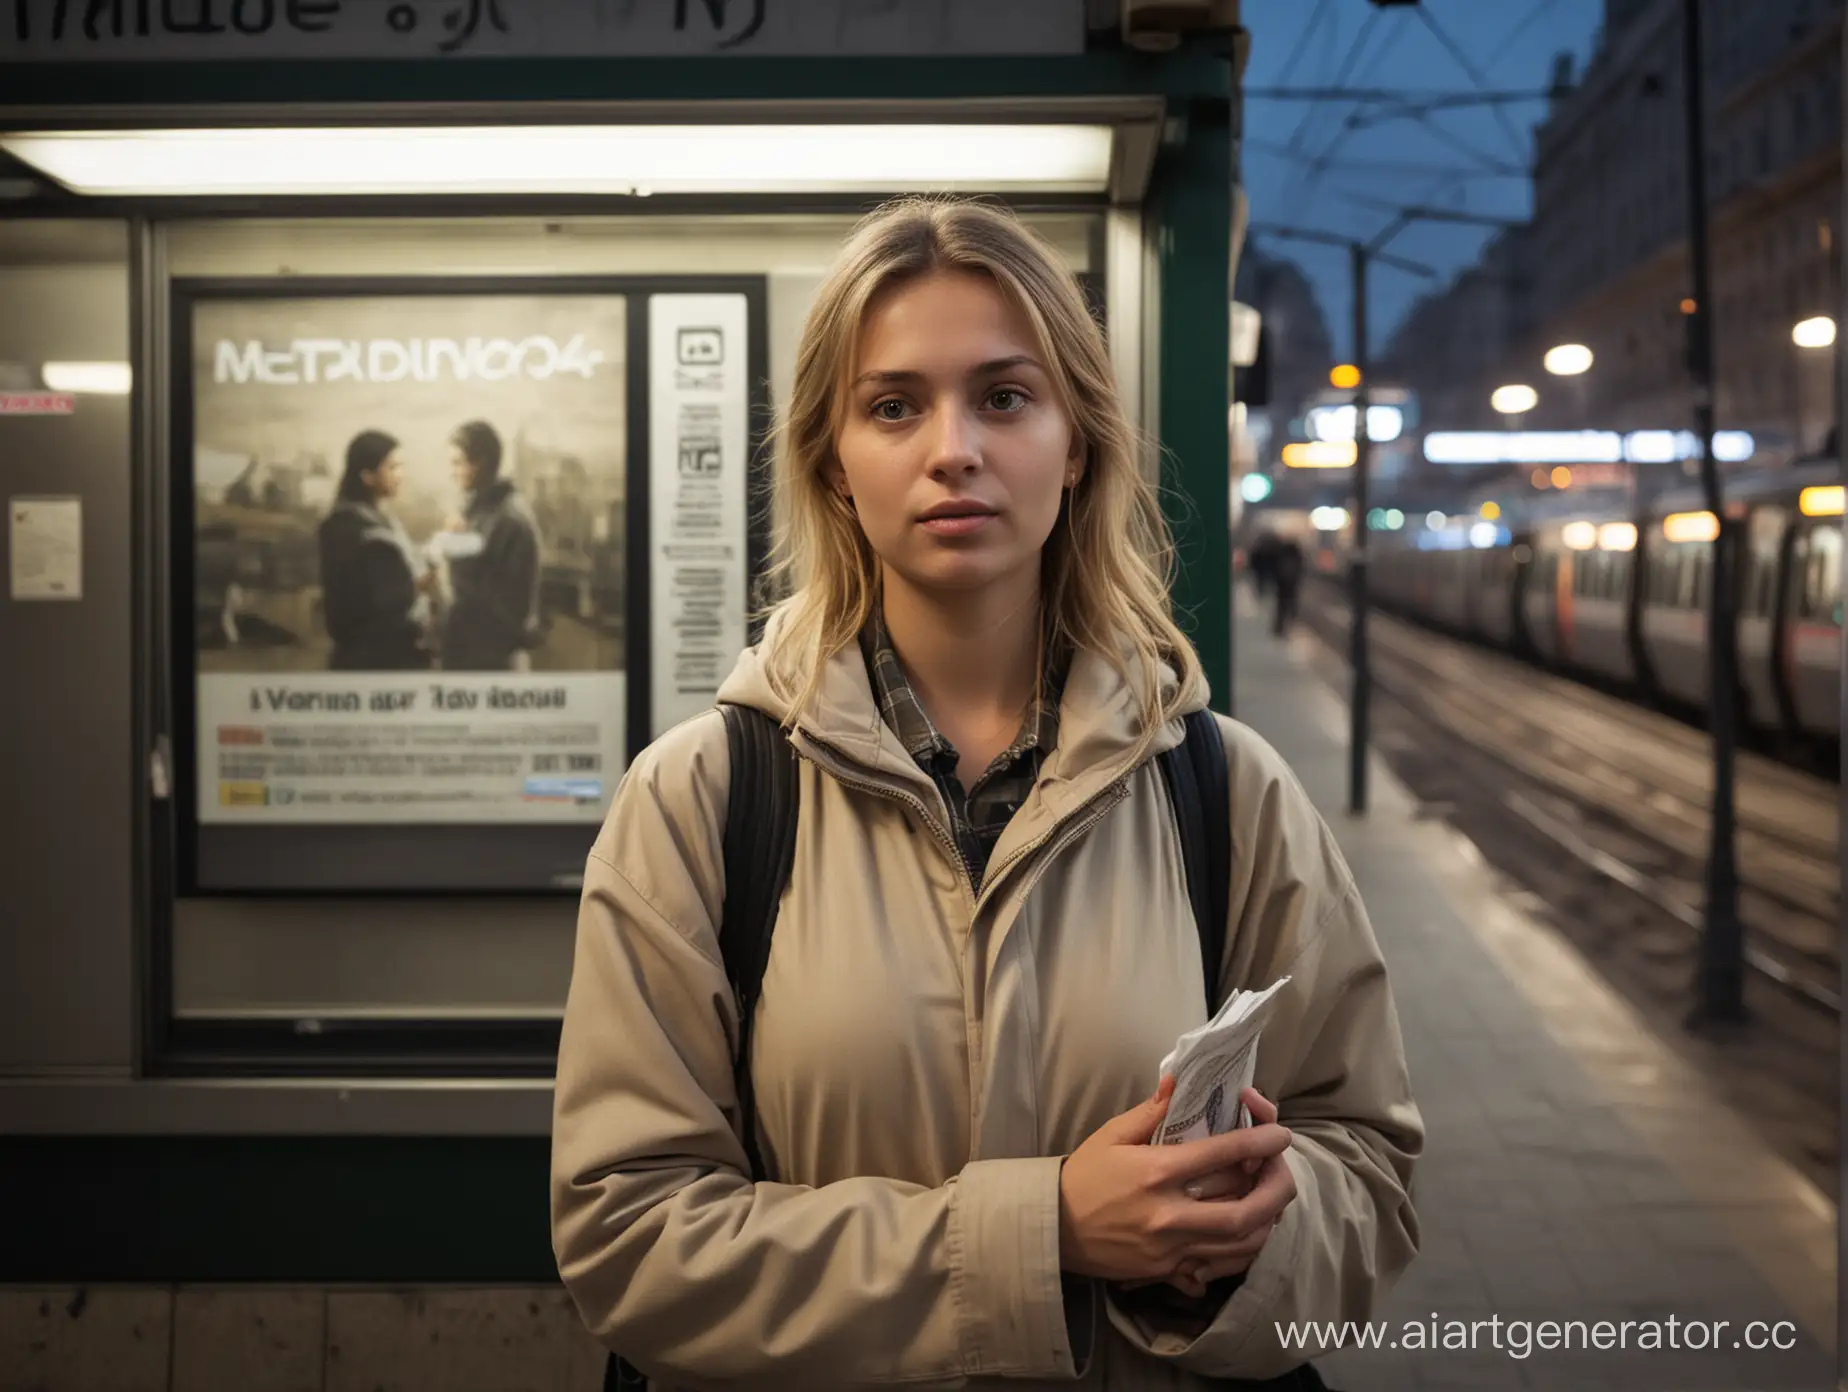 Masha-Embraces-Street-Advertising-A-Day-in-the-Life